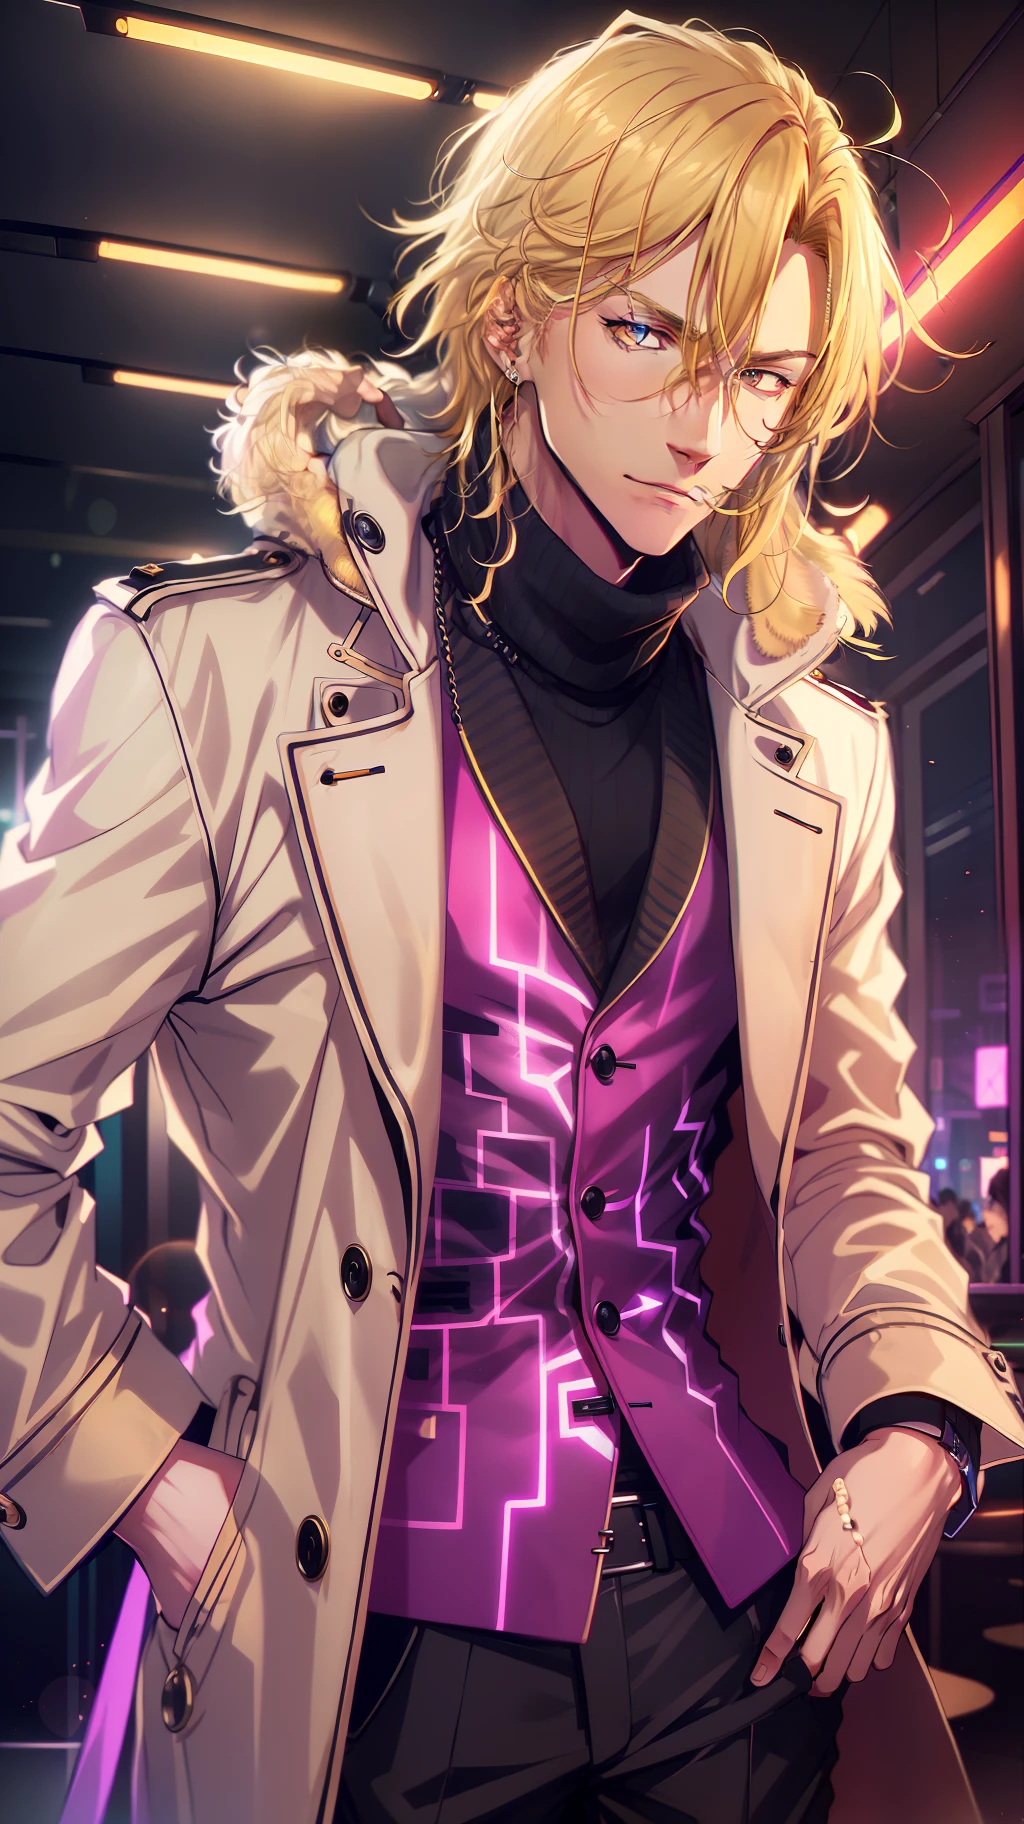 (best quality), a strikingly handsome (blonde man:1.2) in a (trench coat) and (scarf:0.9), (in a nightclub),(vivid colorful neon lights: 1.1), alluring atmosphere.